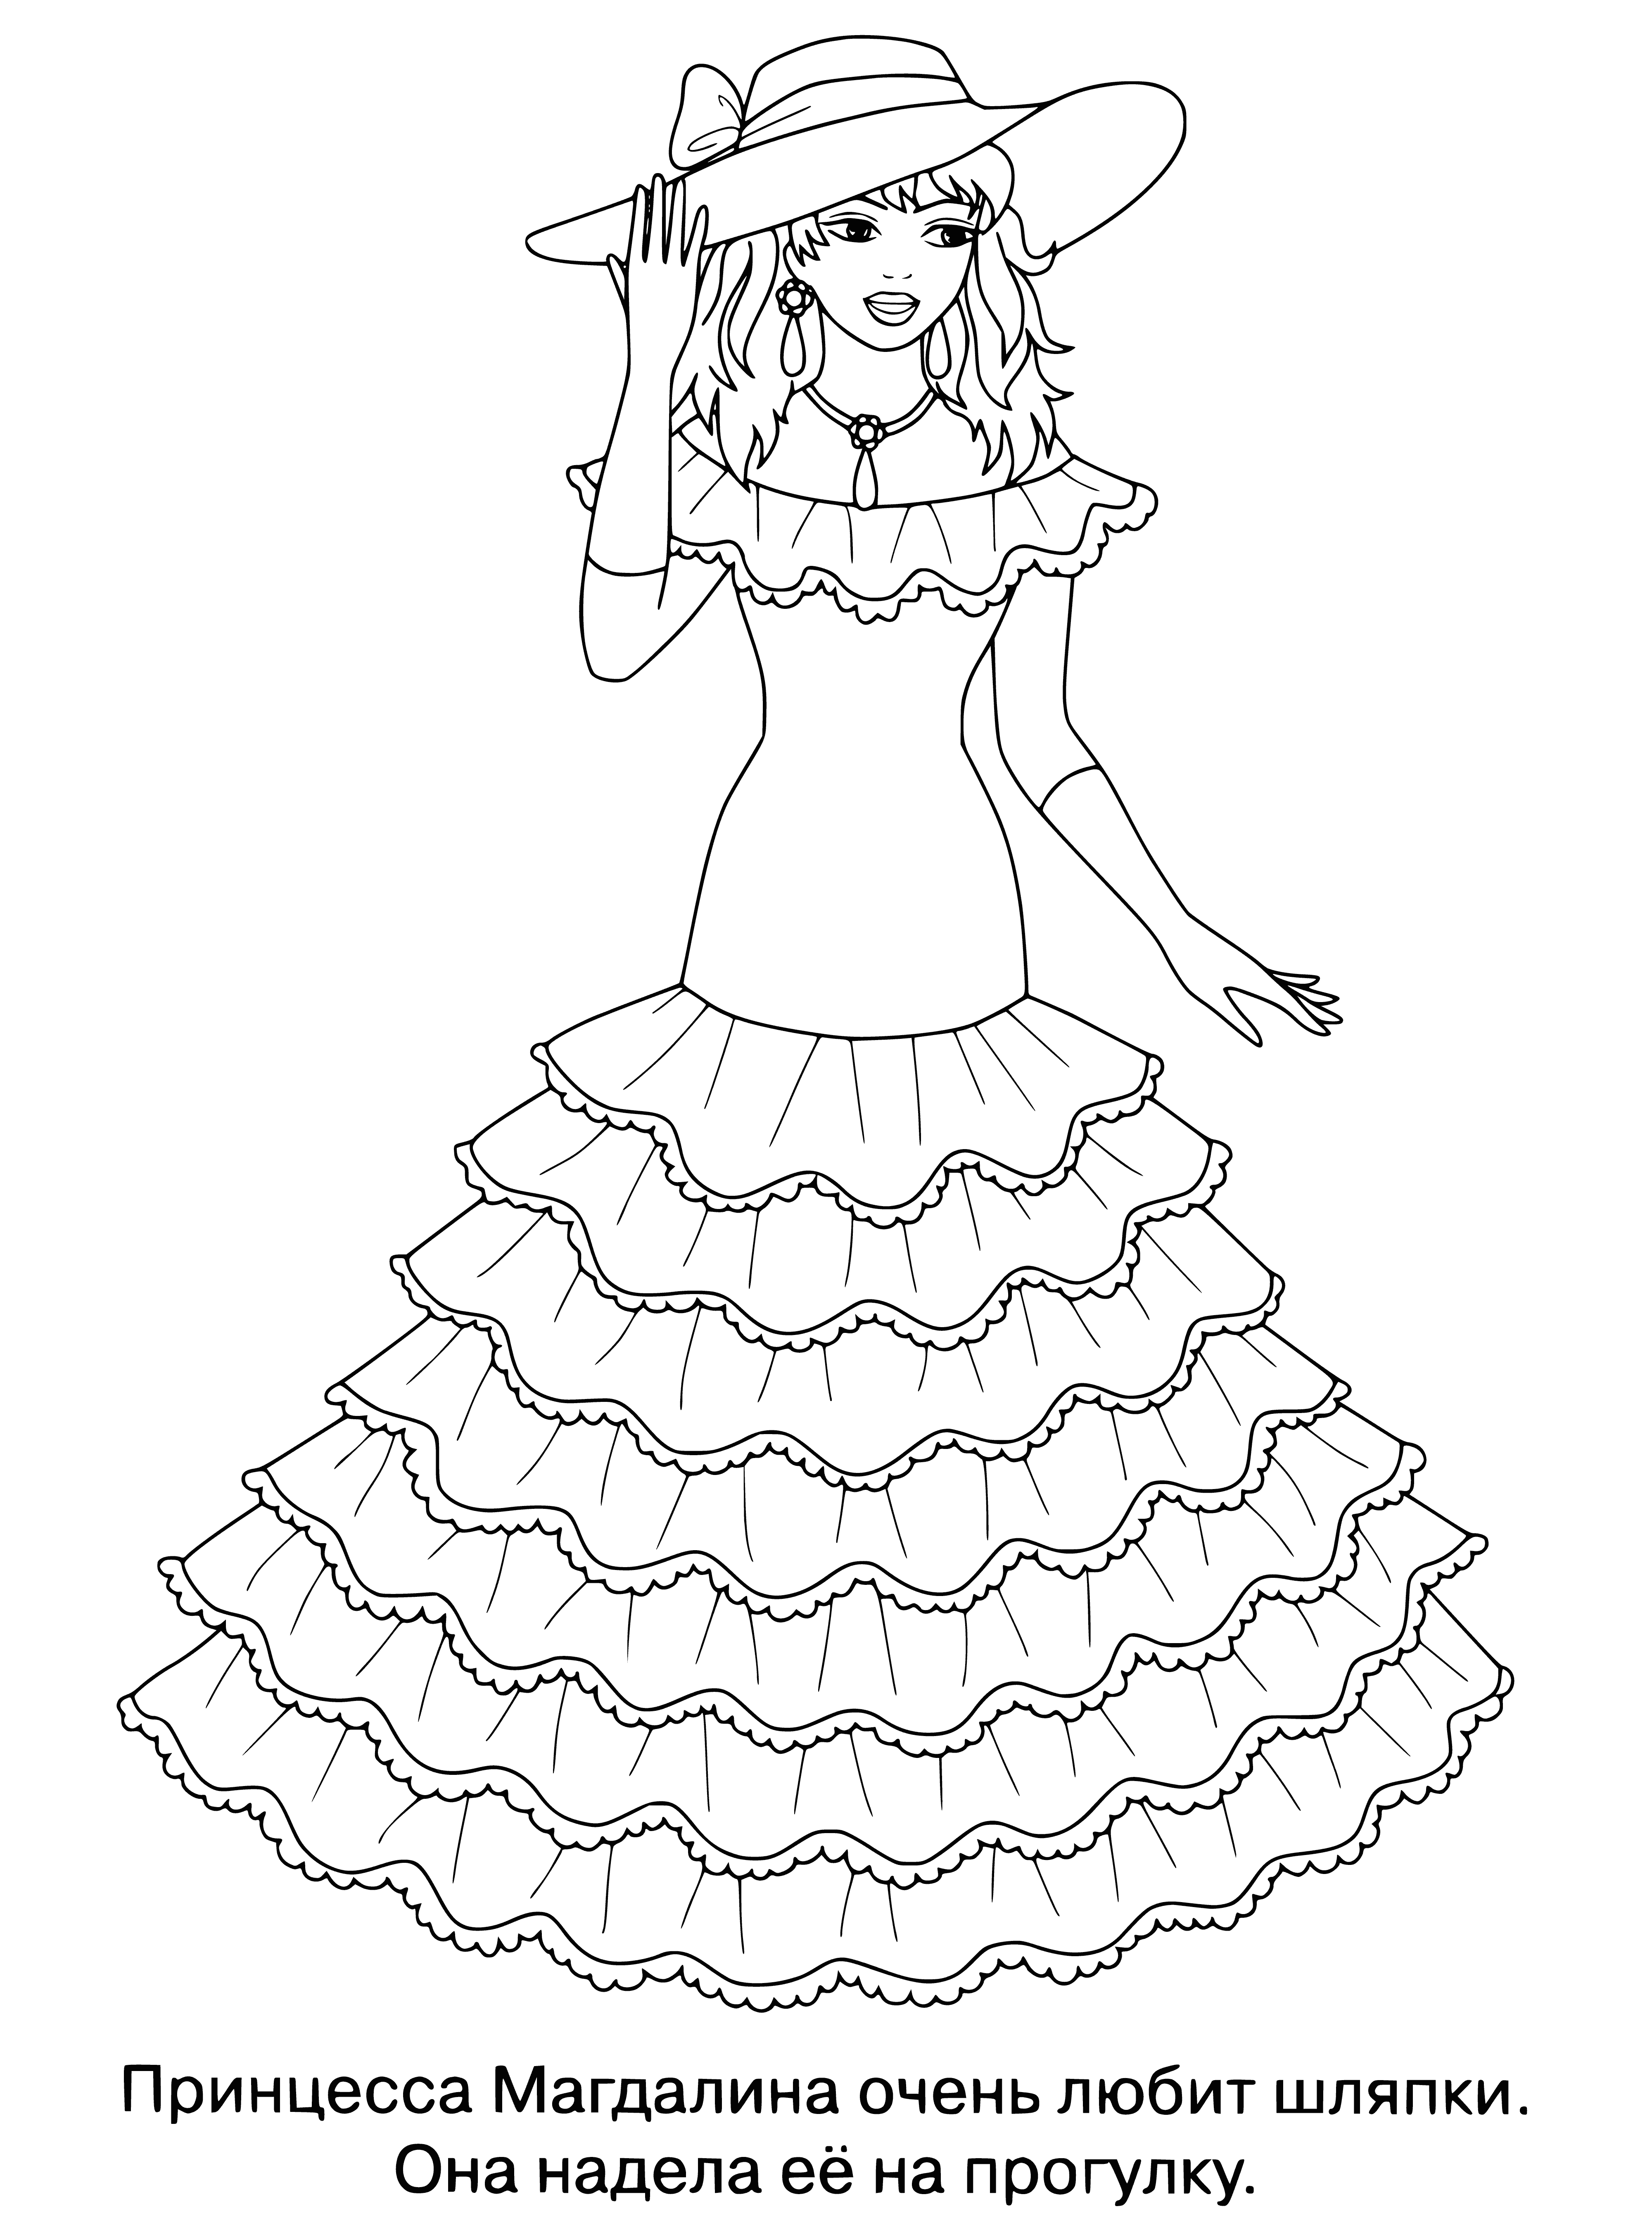 coloring page: Princess Magdalene sits on a throne, wearing a crown & a pink dress, with a book, candle and rose in front of her. She has a serious expression.